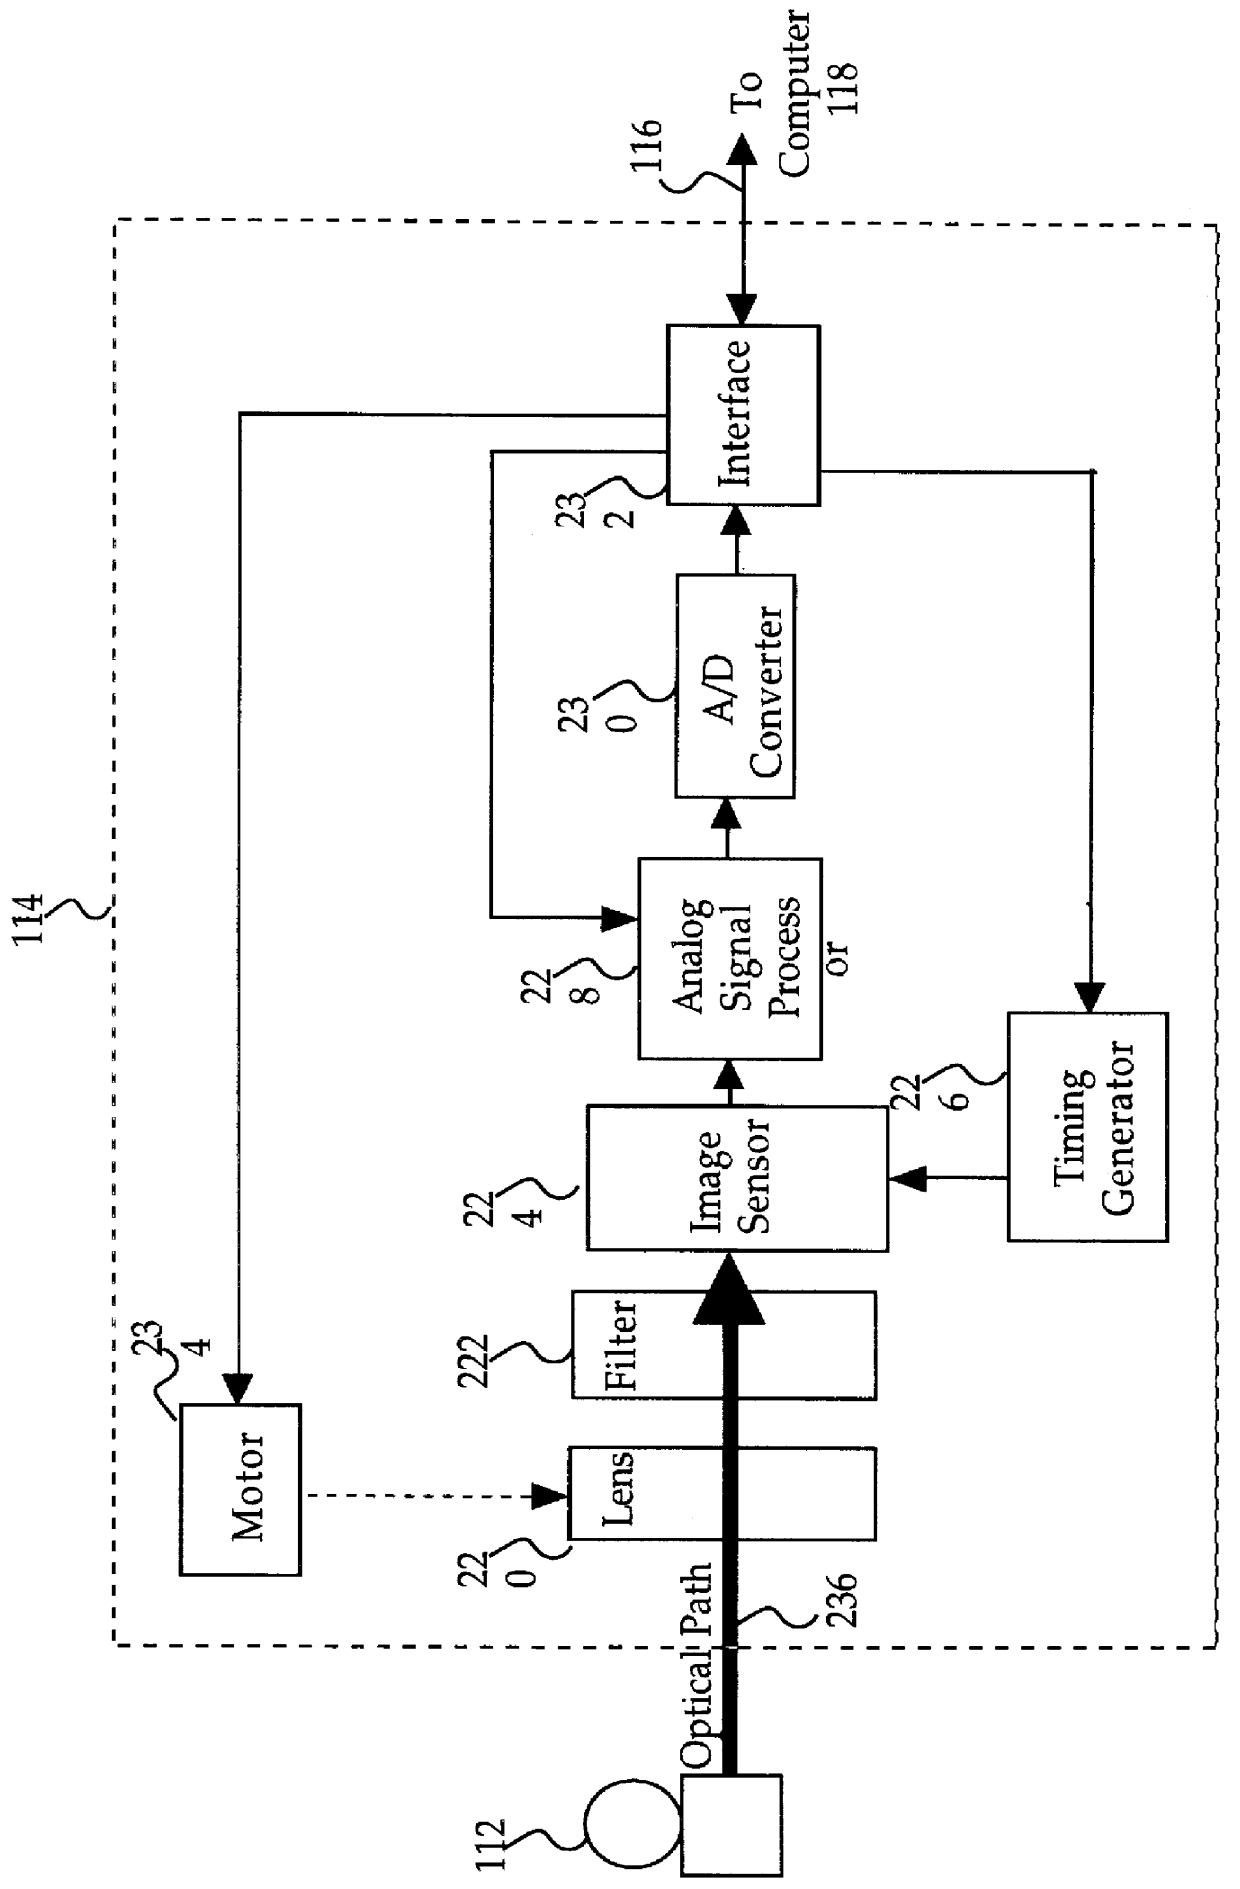 System and method for using a scripting language to set digital camera device features